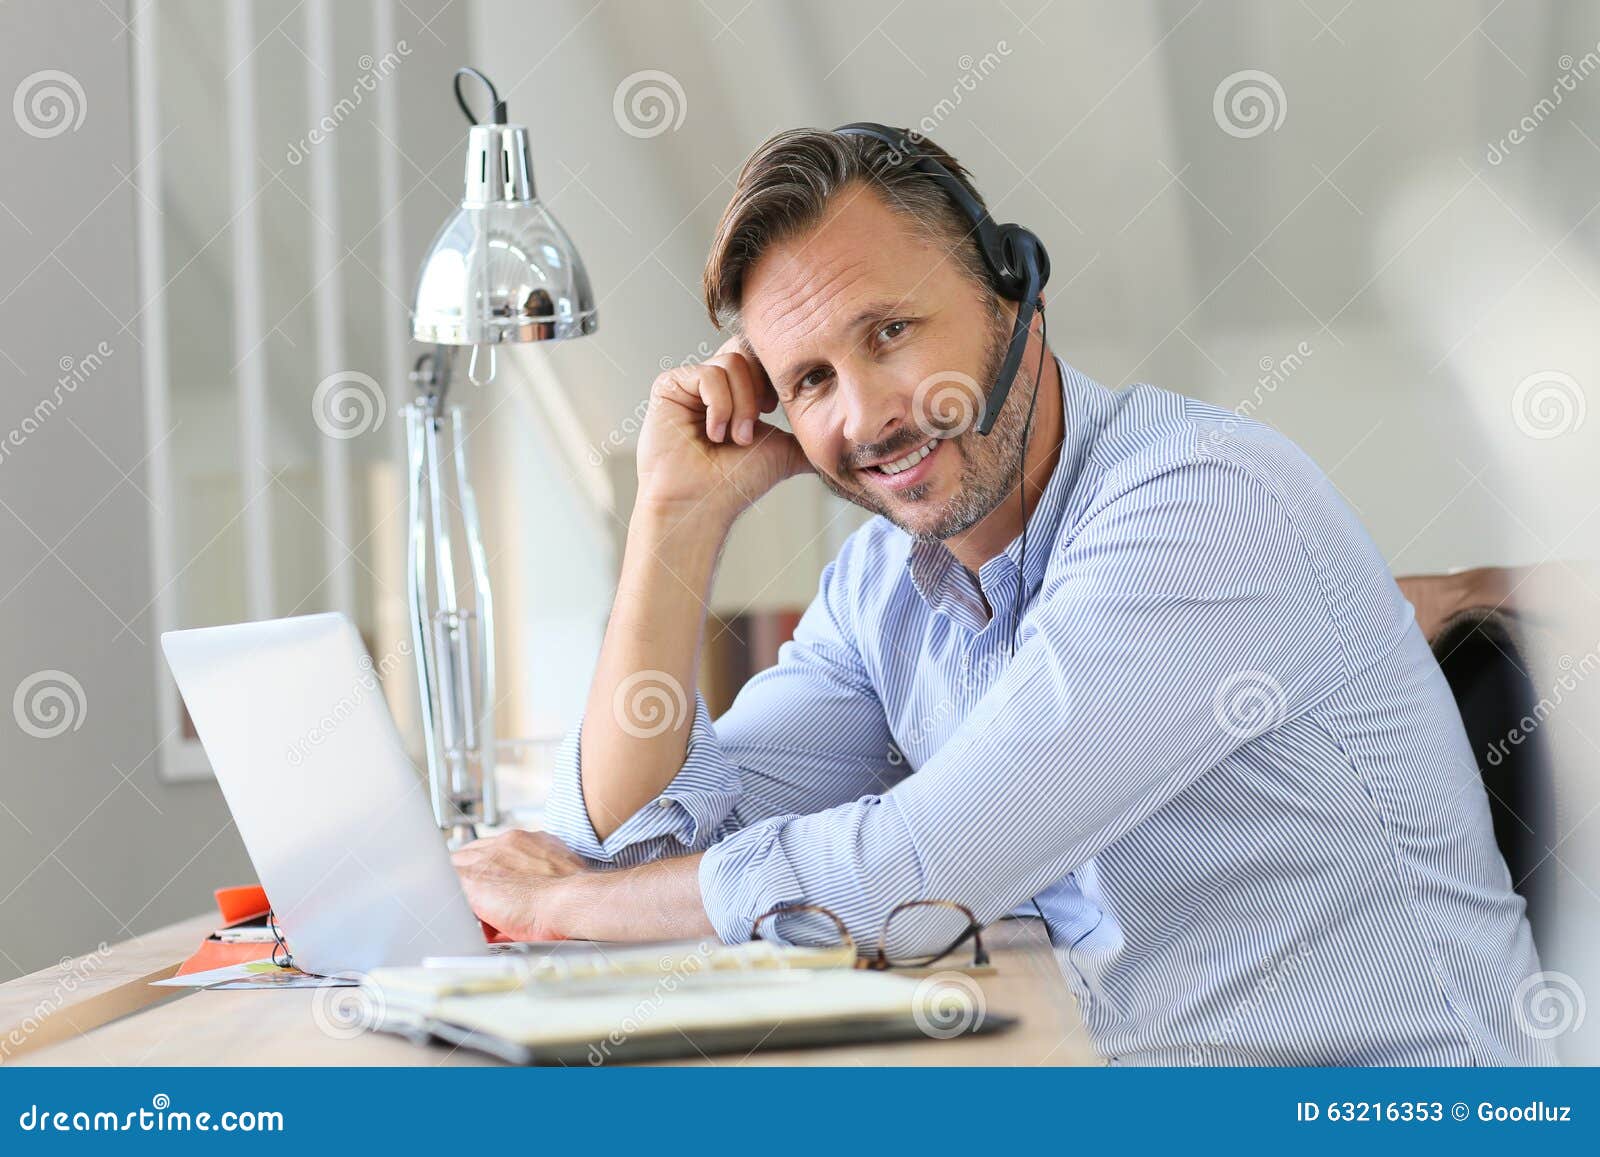 businessman teleworking with headset